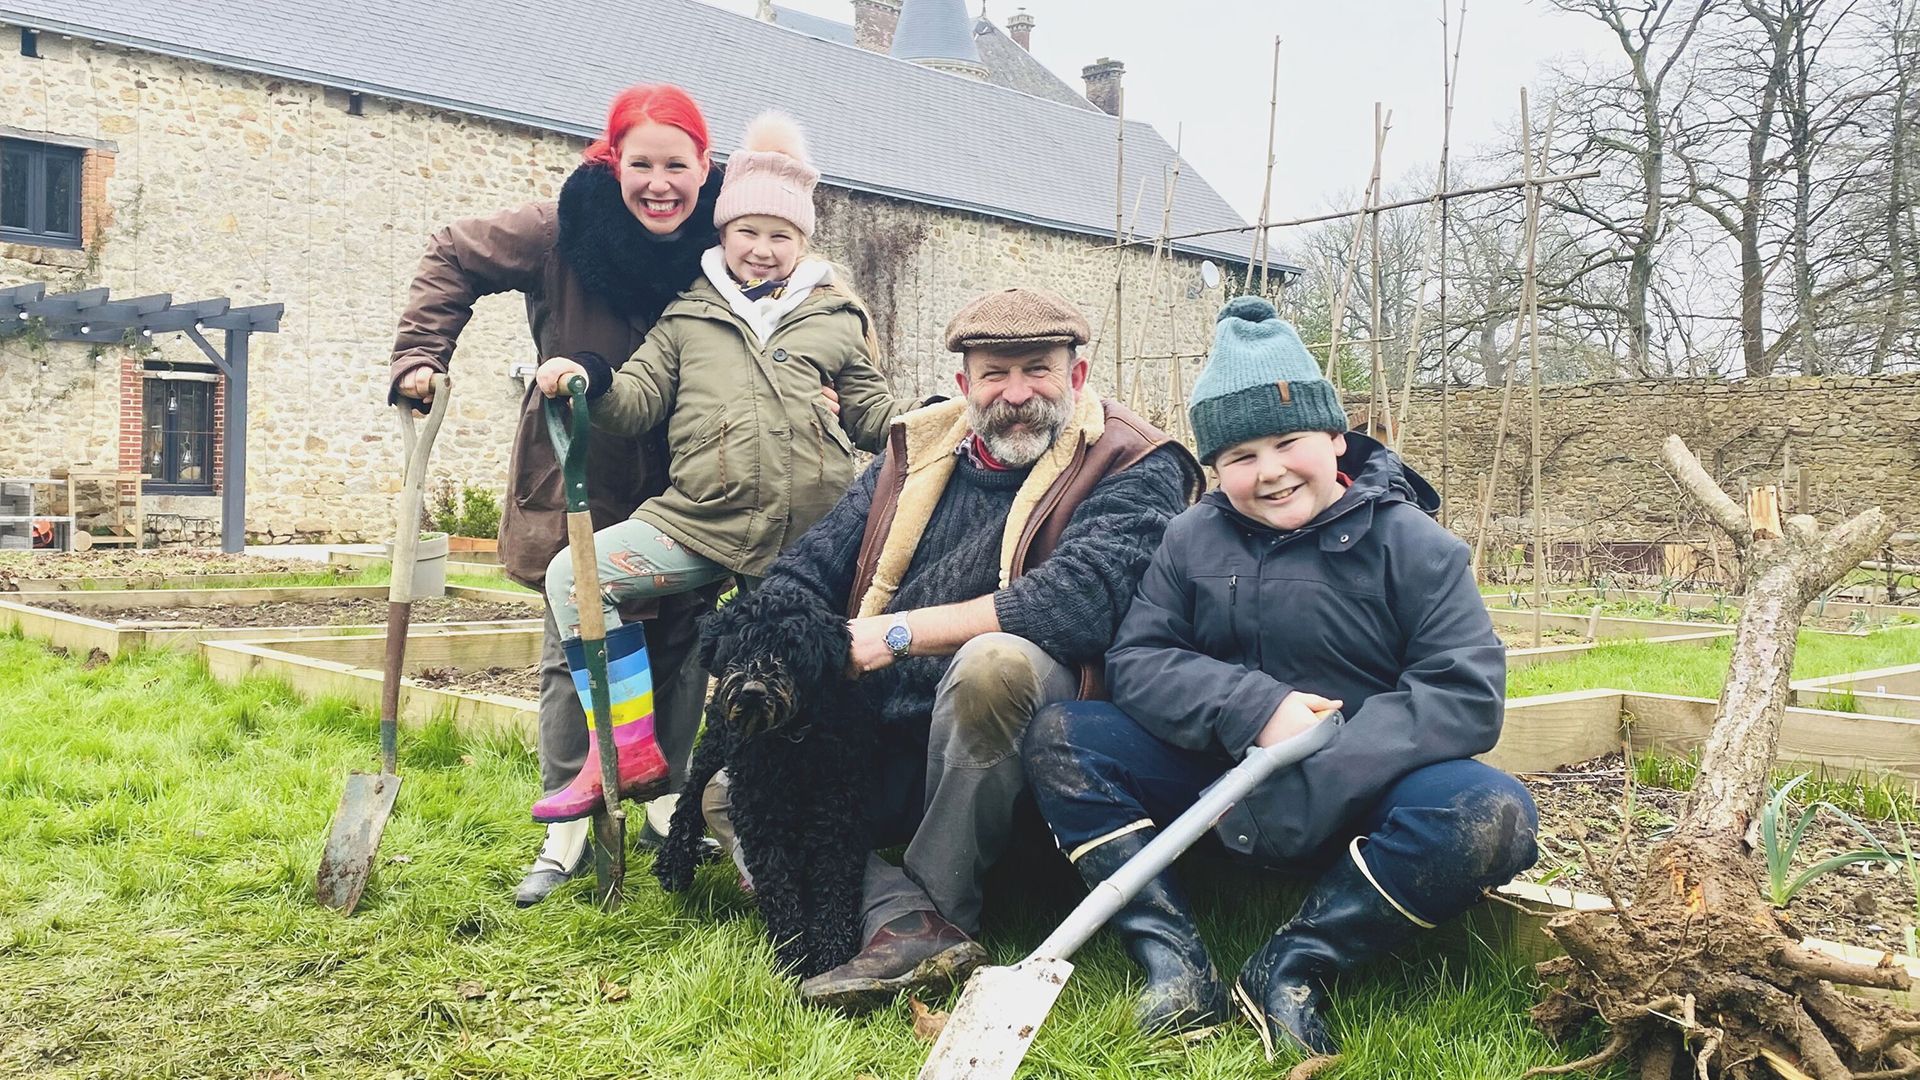 Angel and Dick Strawbridge digging in the garden with their children